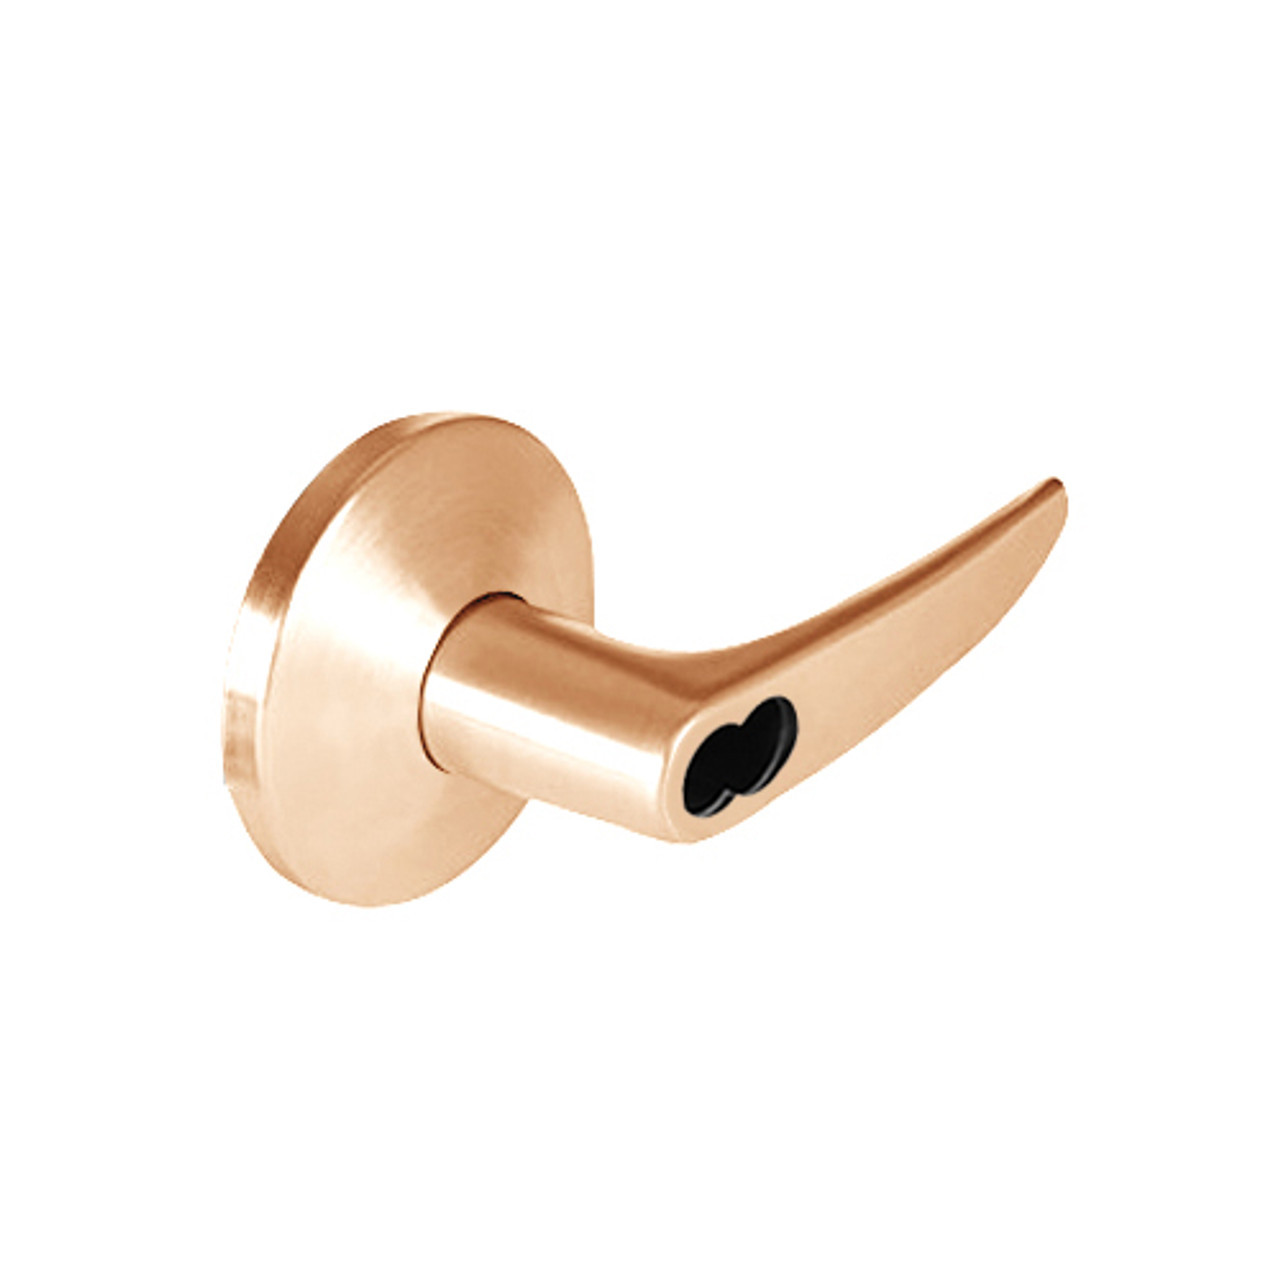 9K37DR16LSTK611LM Best 9K Series Special Function Cylindrical Lever Locks with Curved without Return Lever Design Accept 7 Pin Best Core in Bright Bronze